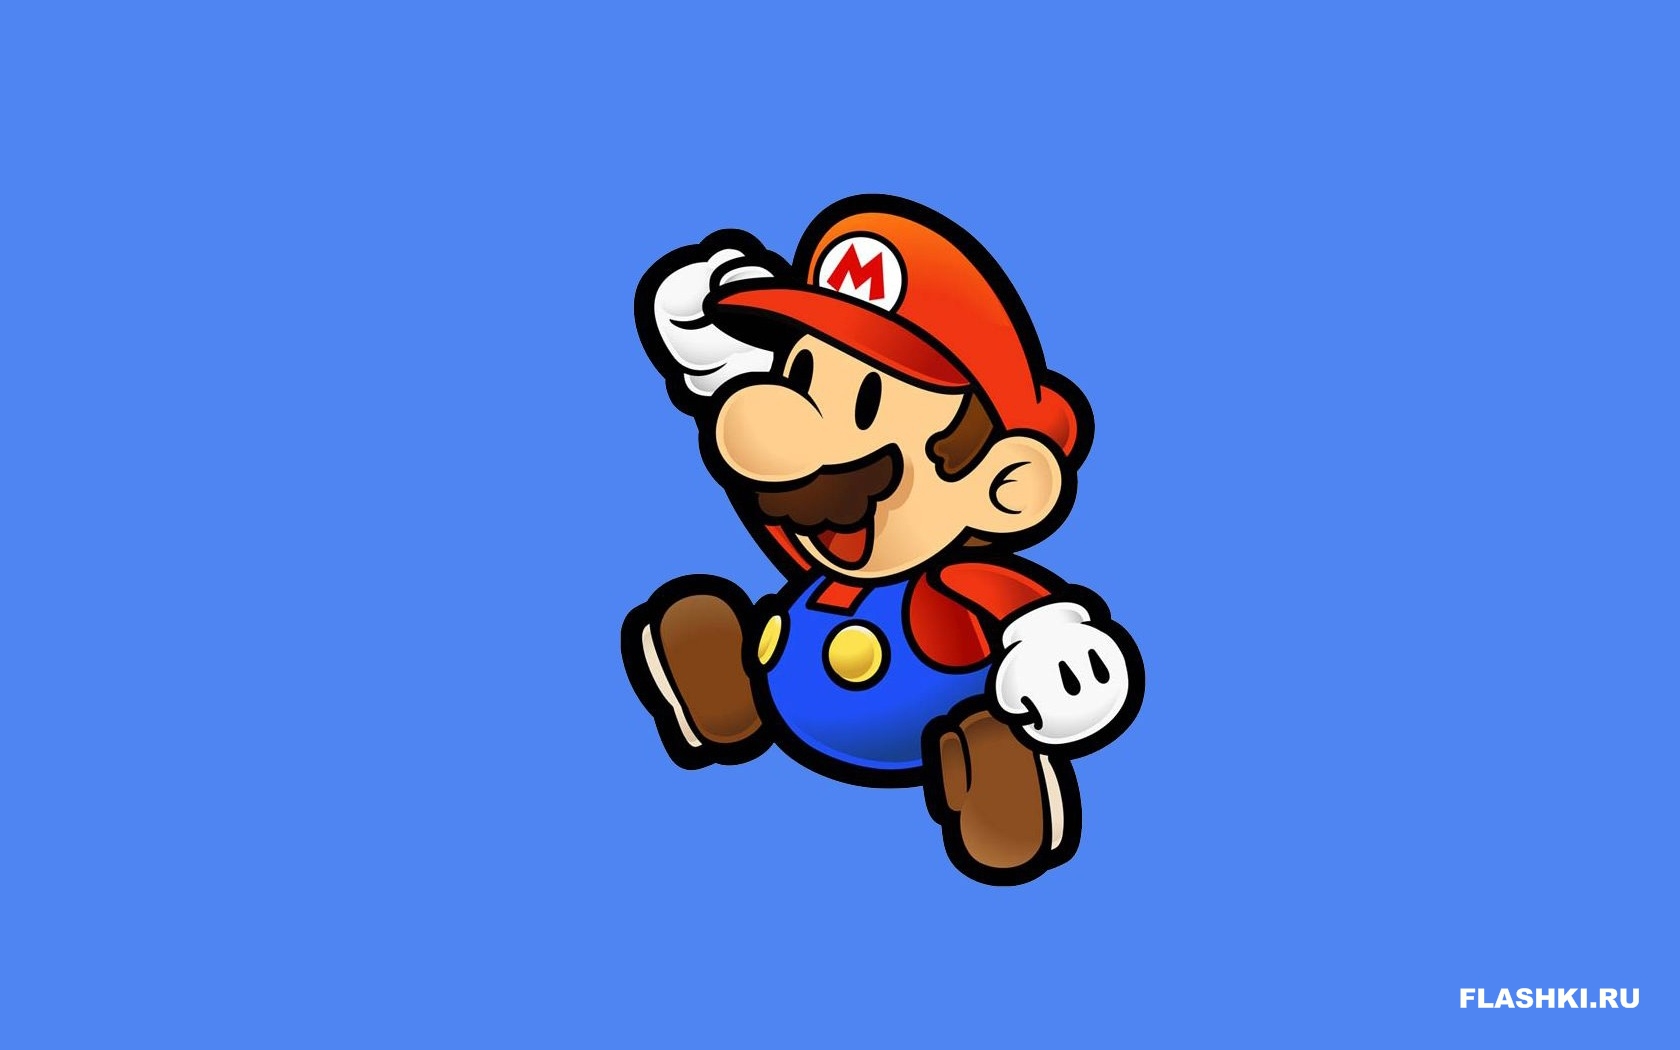 Super Mario Wallpaper And Image Pictures Photos